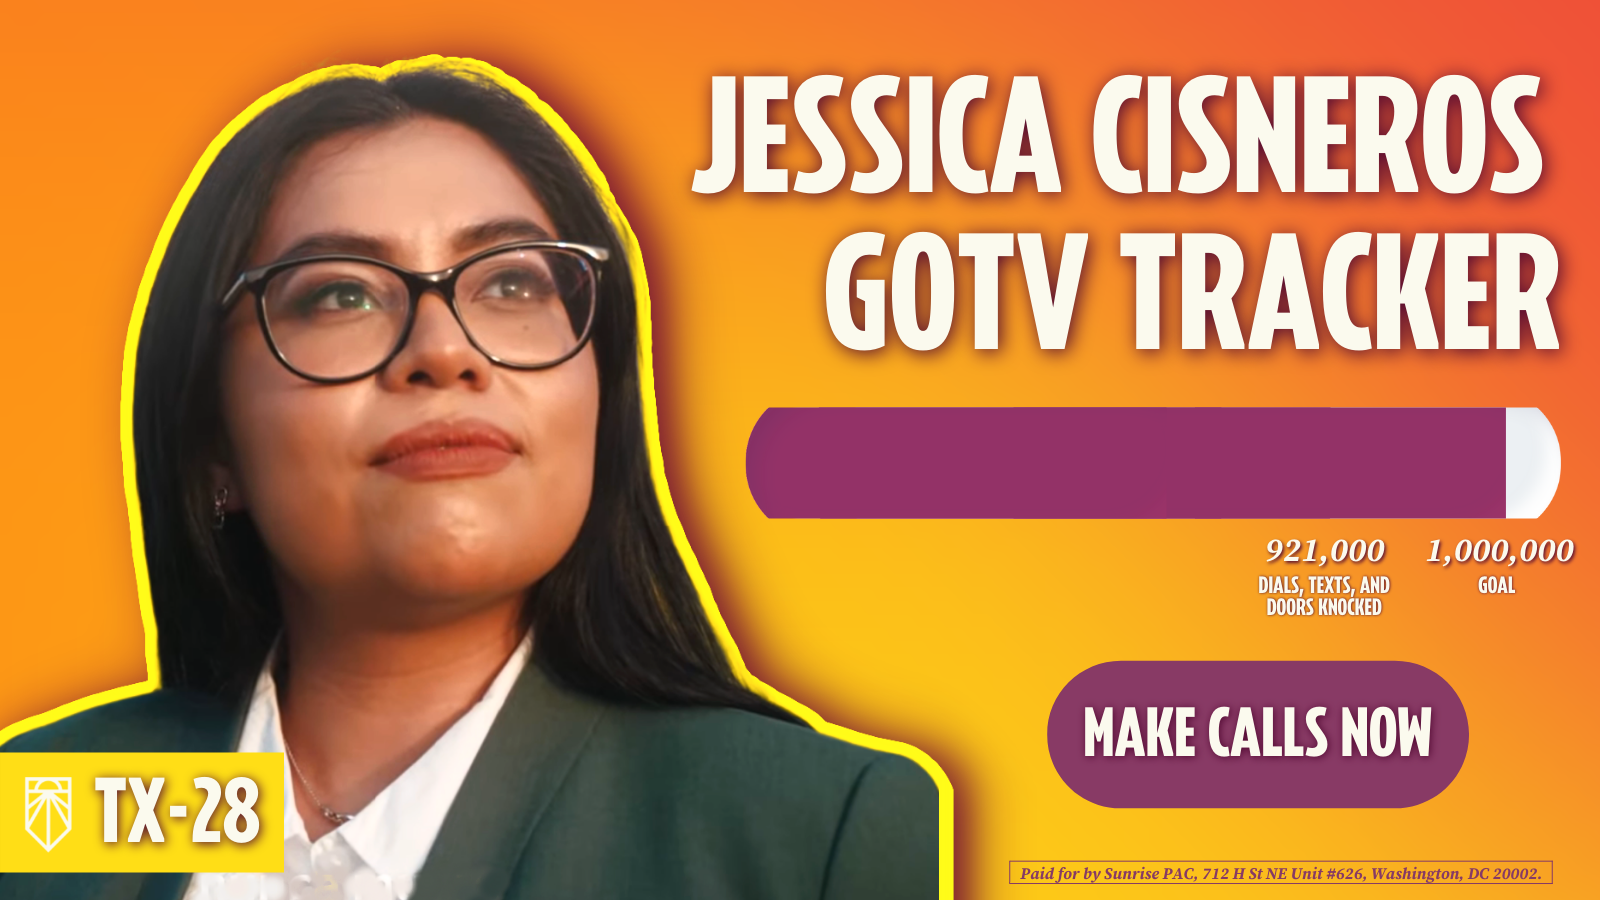 Jessica Cisneros GOTV Tracker - 921,000 attempted voter contacts, 1,000,000 goal - Make Calls. Paid for by Sunrise PAC, 712 H St NE Unit #626, Washington, DC 20002.